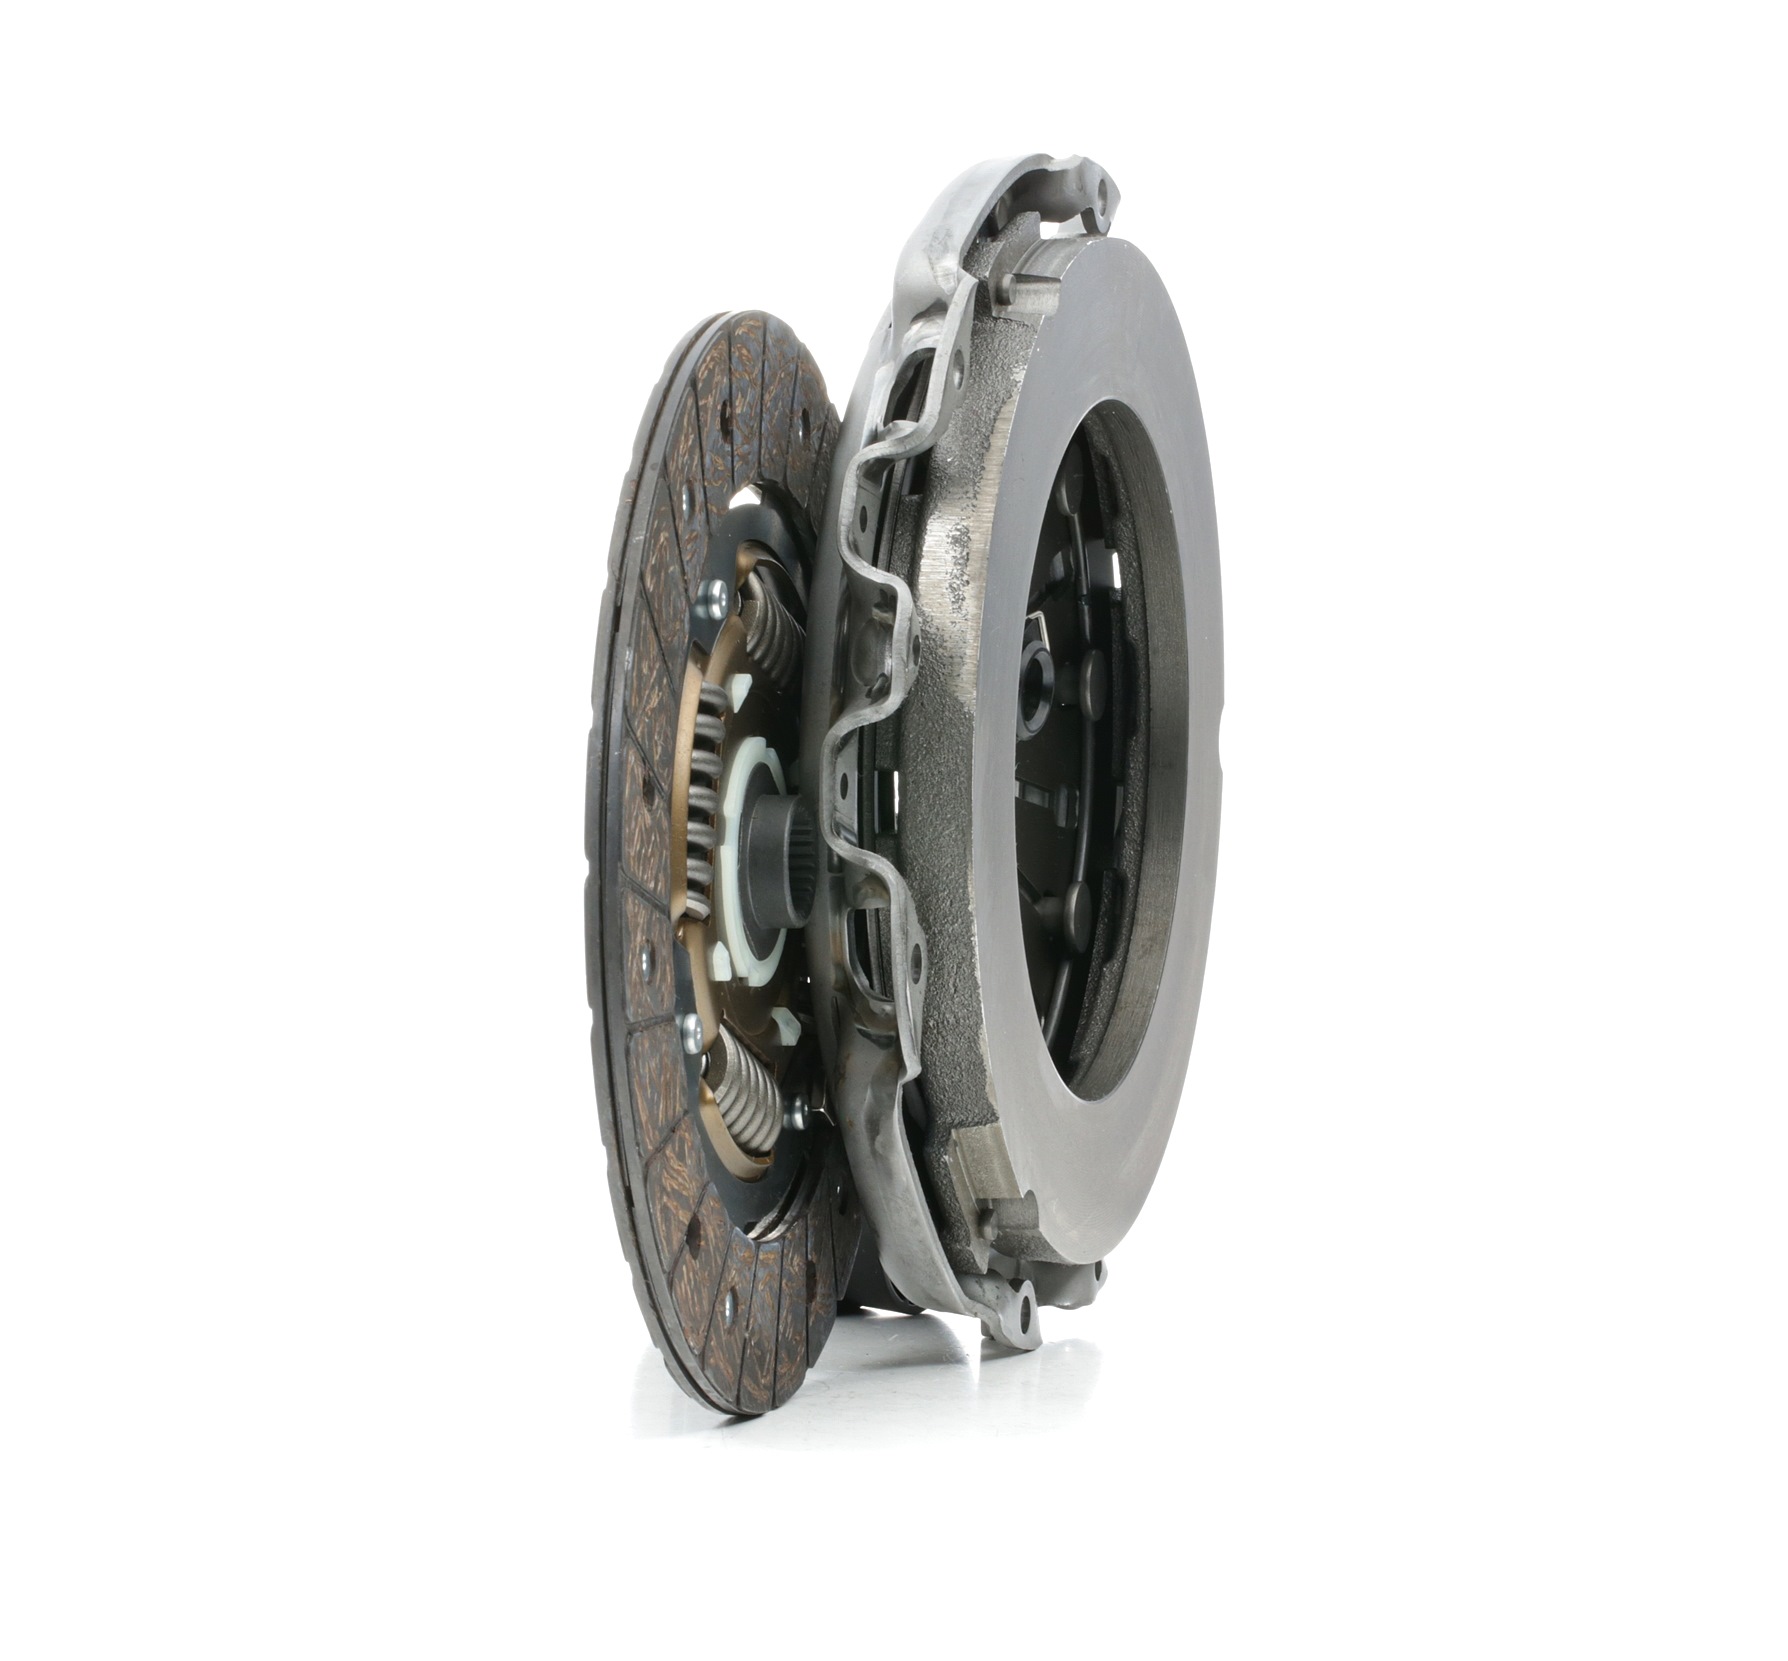 SKCK-0100273 STARK Clutch set DACIA three-piece, with clutch pressure plate, with central slave cylinder, with clutch disc, 220mm